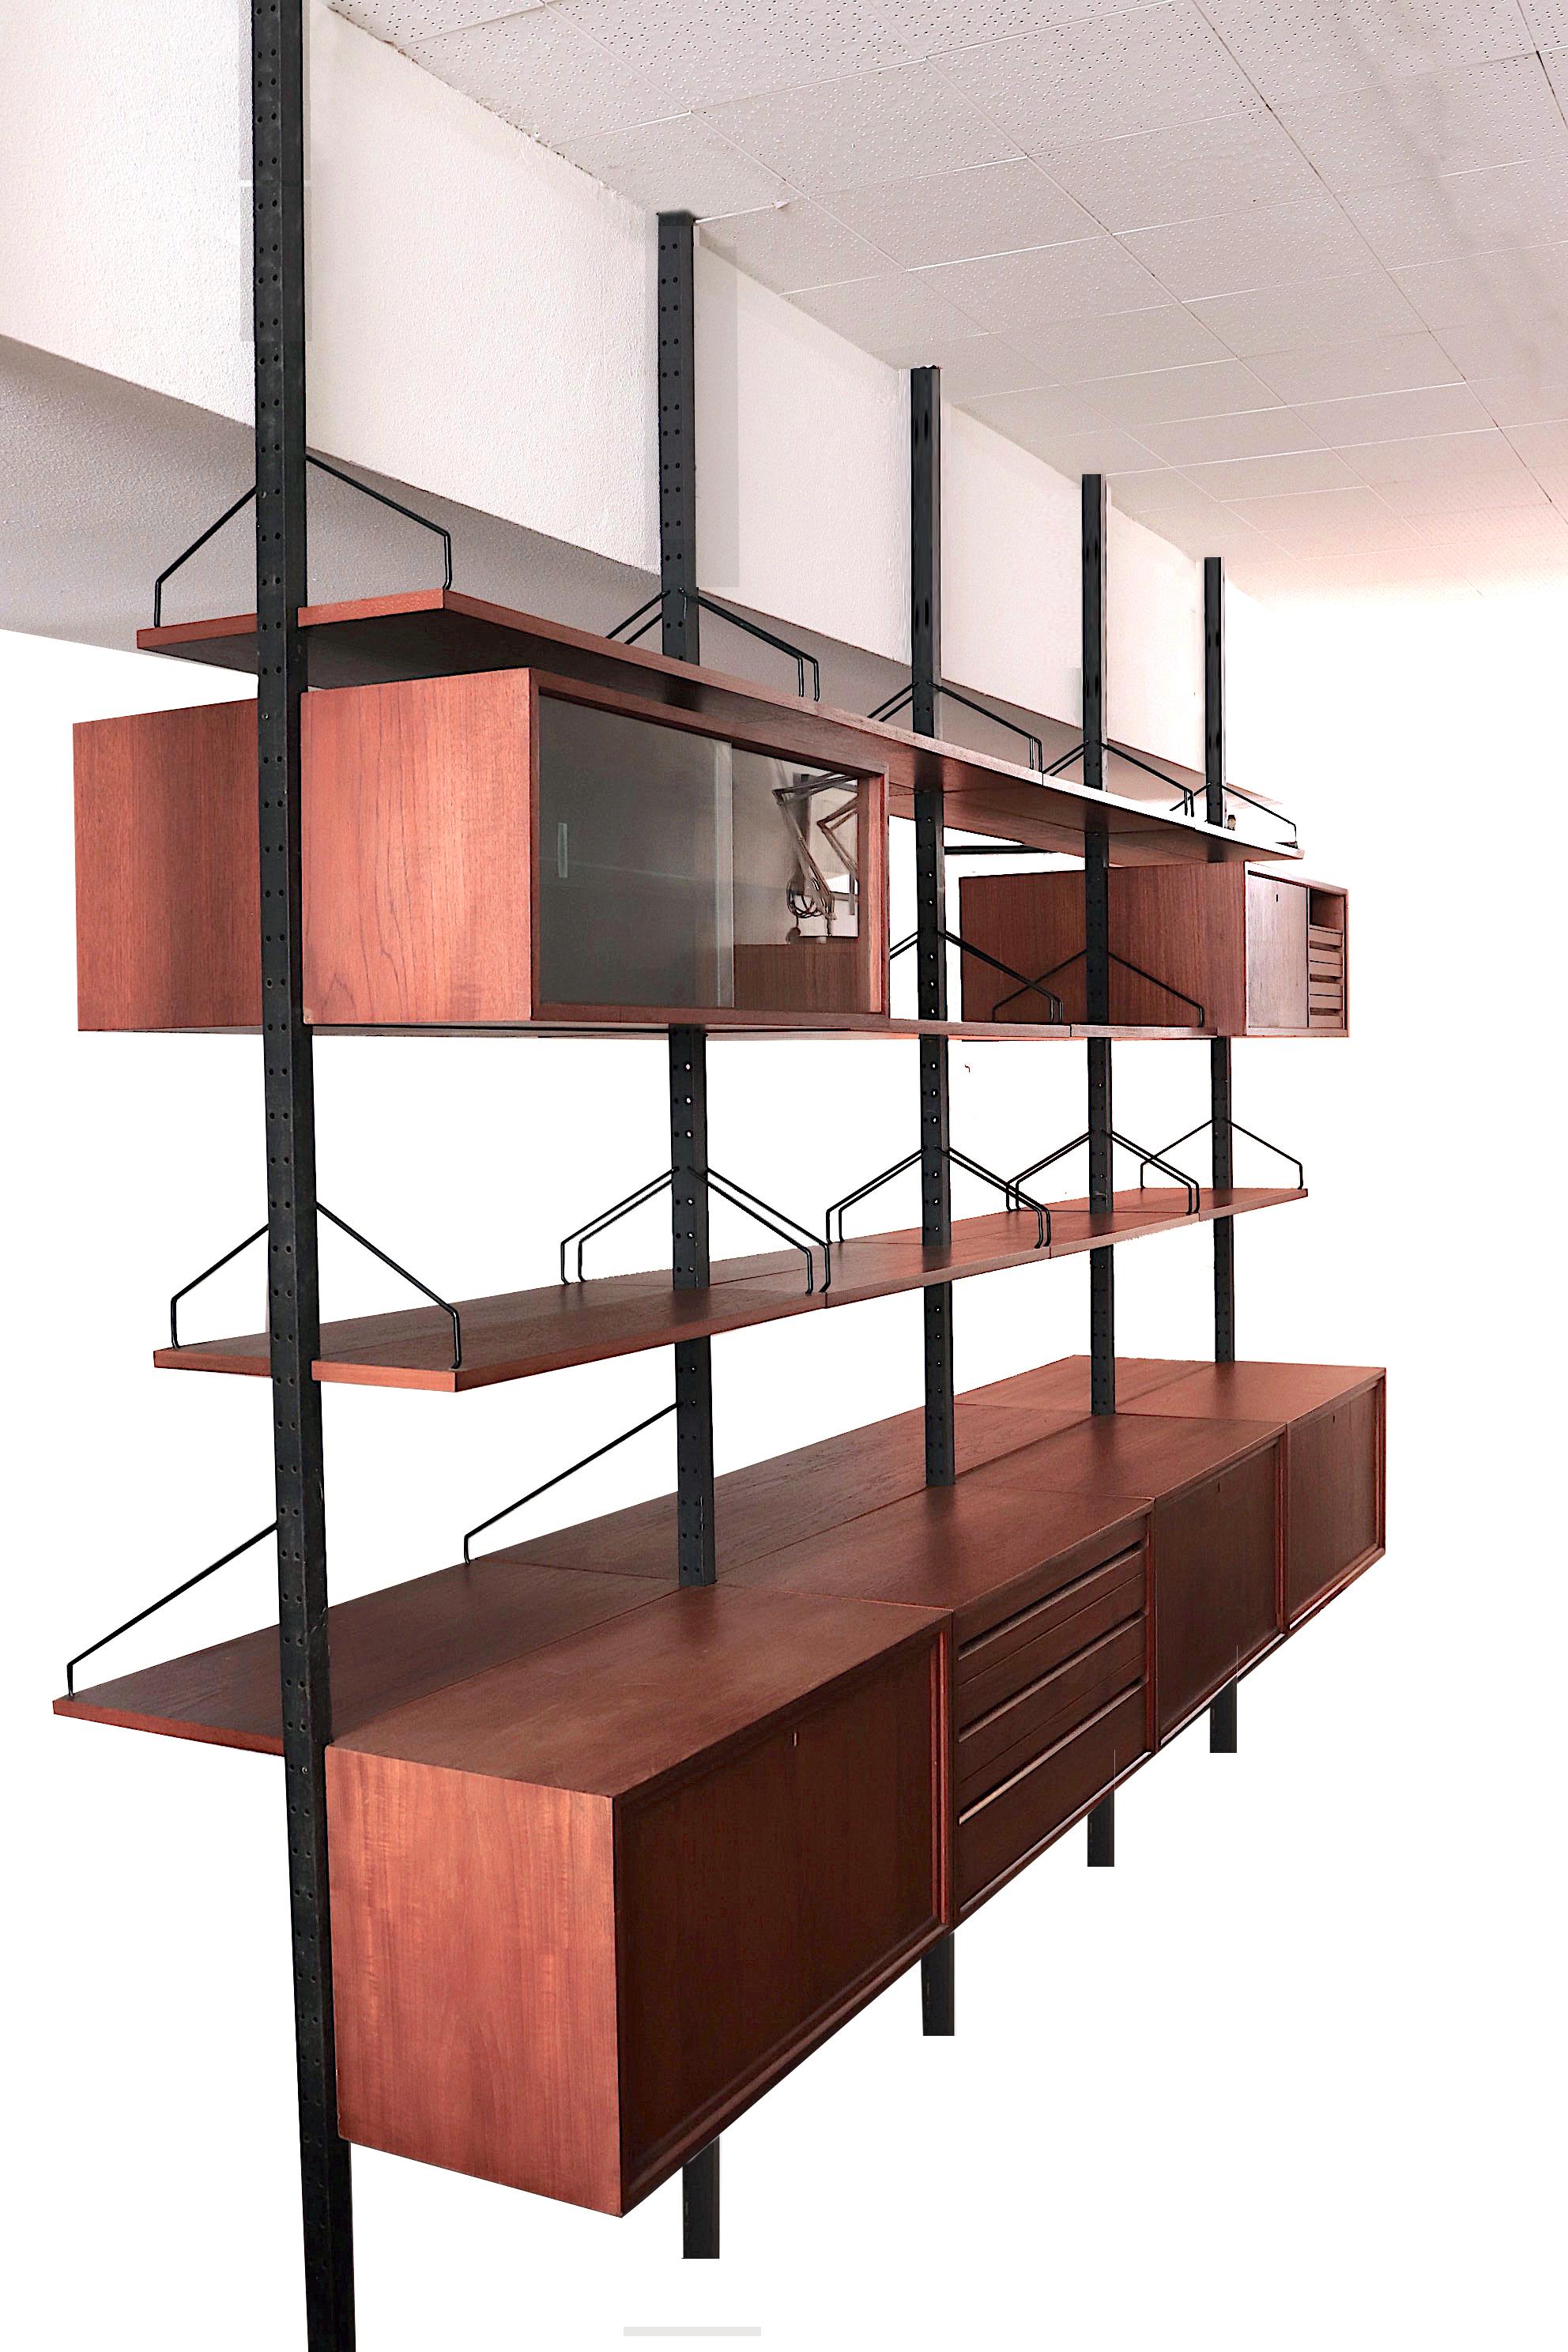 Extra large double sided teak room divider with metal tension supports. Very impressive two sided - four section unit with ample storage and shelving. Outfitted with teak cabinets with both glass and teak sliding doors, drop-down cabinet and endless